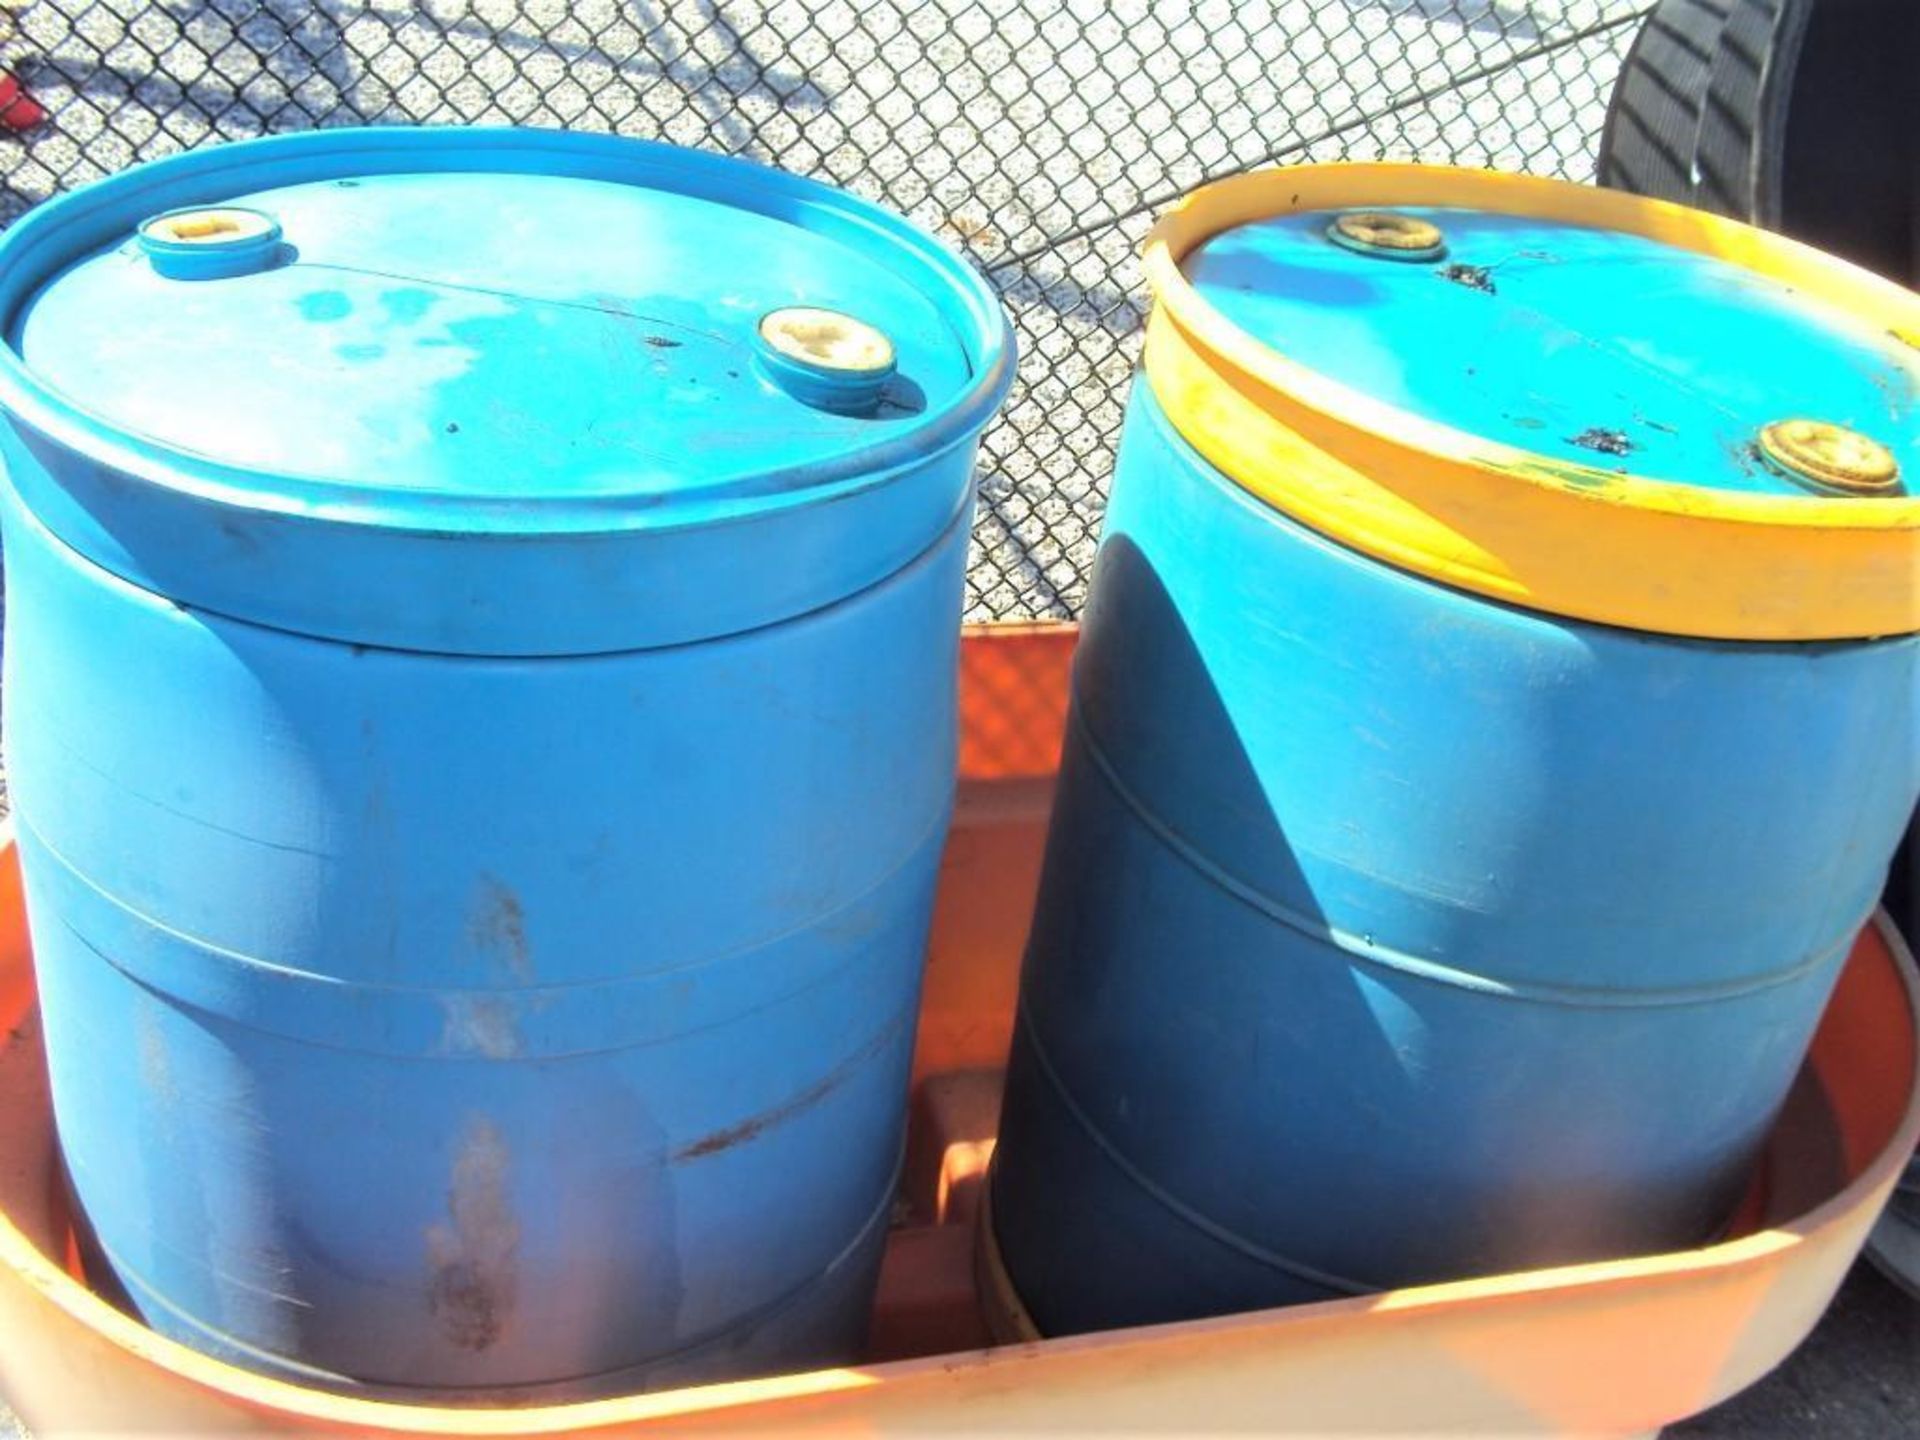 Waste Oil Containment/Disposal Tanks - Image 2 of 4